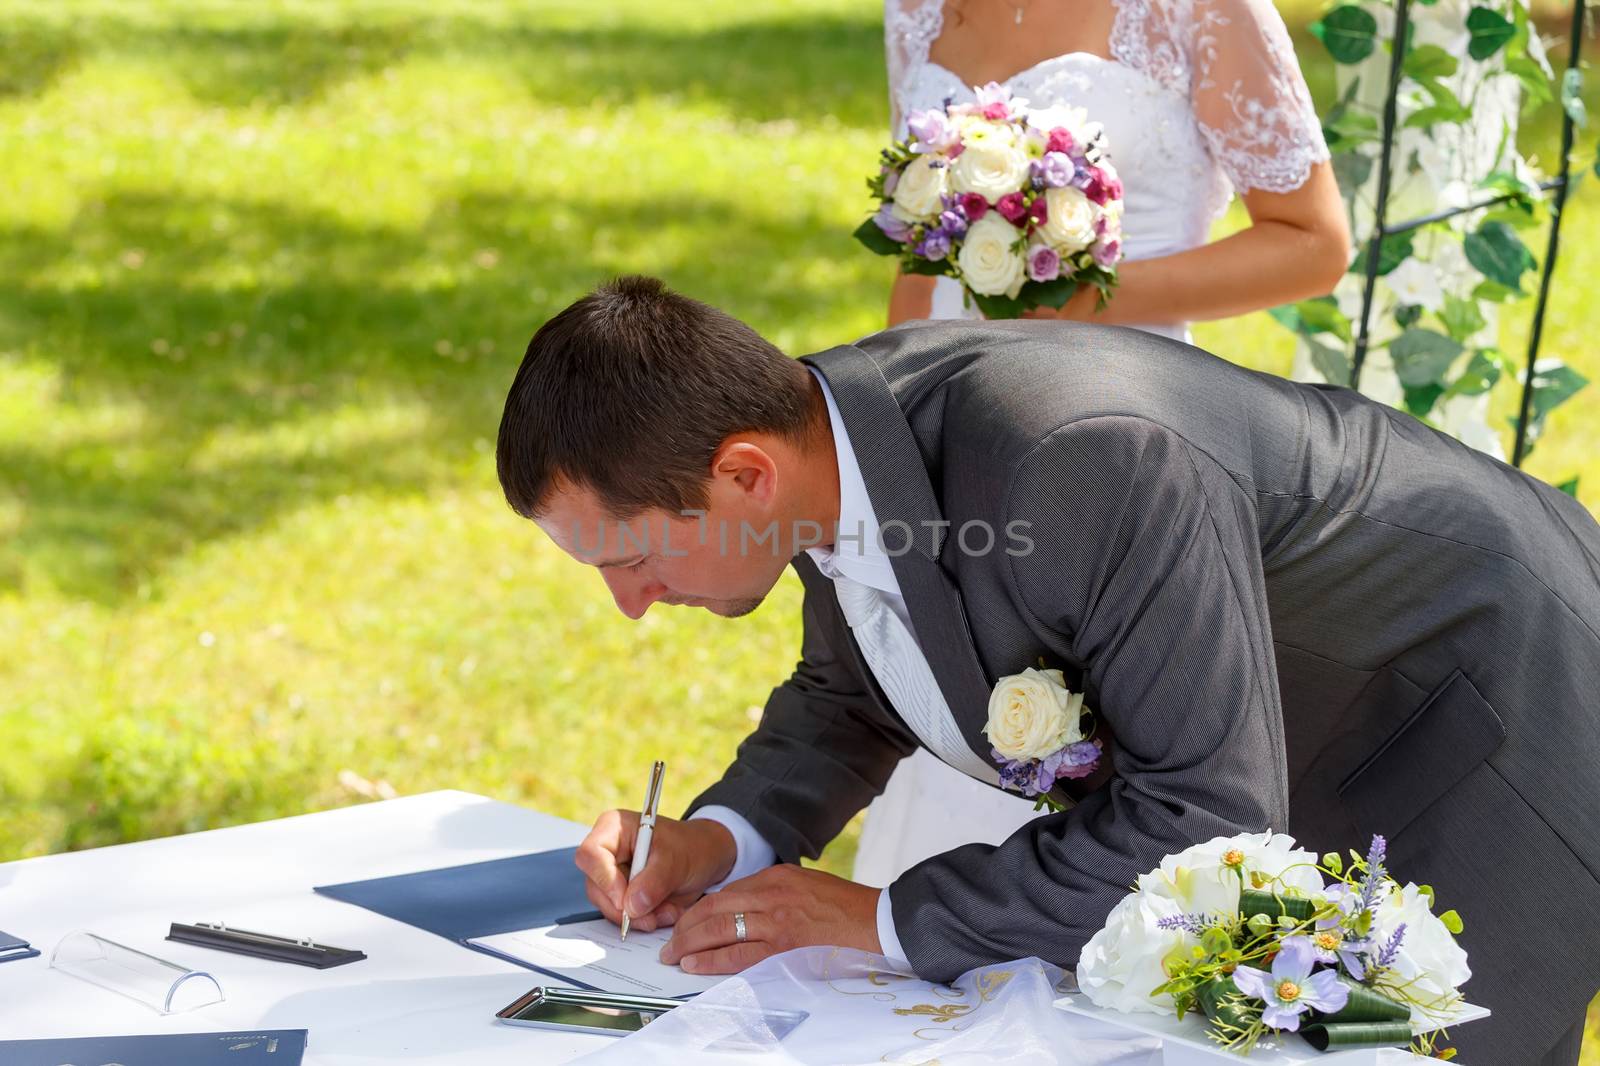 groom signing wedding certificate in park with bride in background